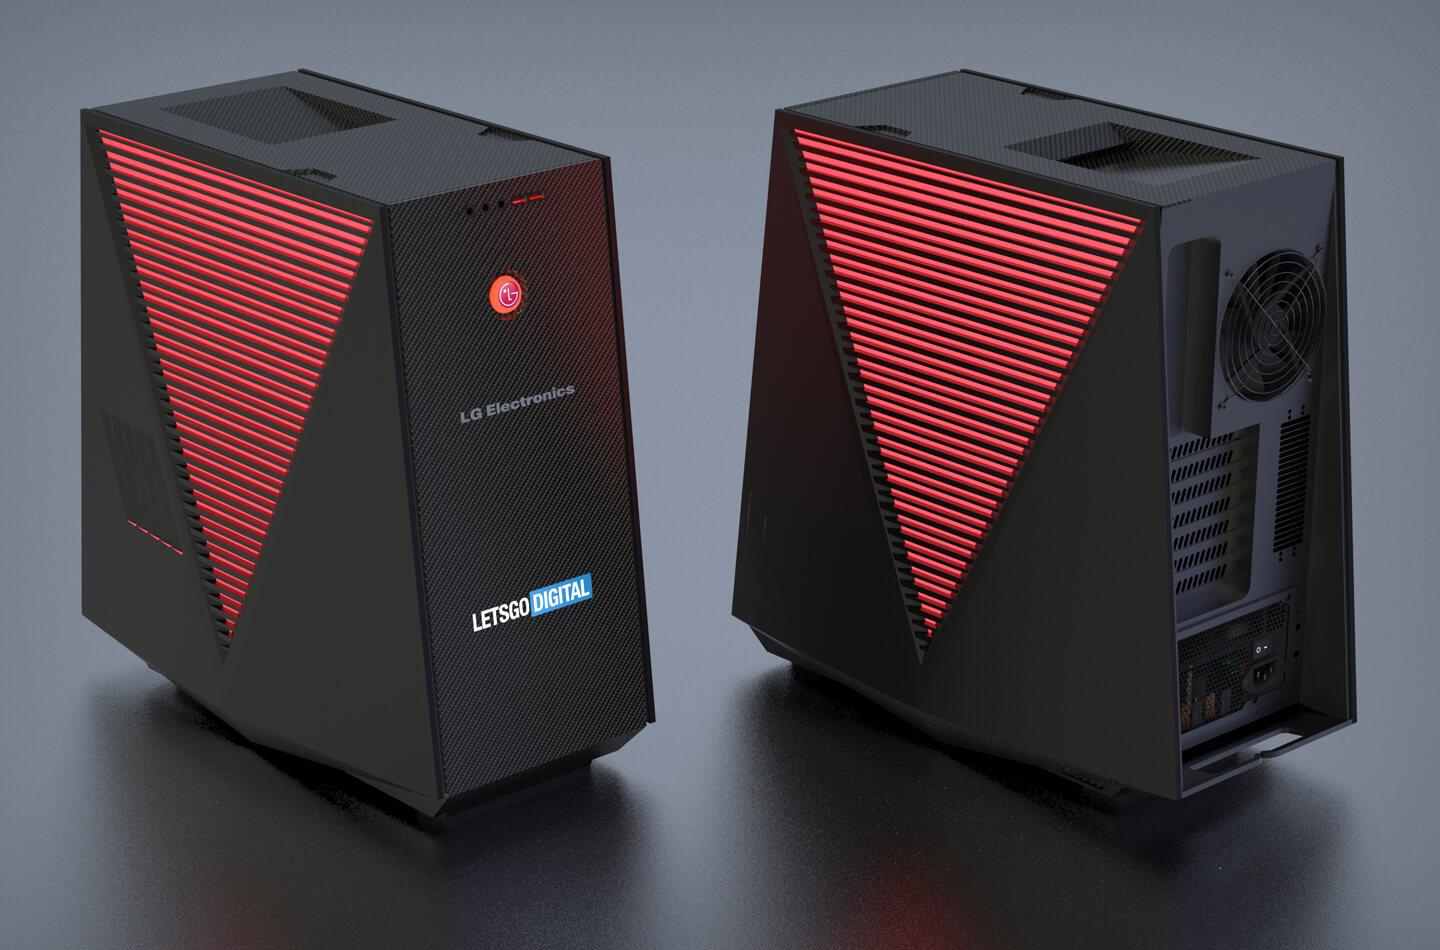 LG’s new patented gaming PC case is designed to take a beating